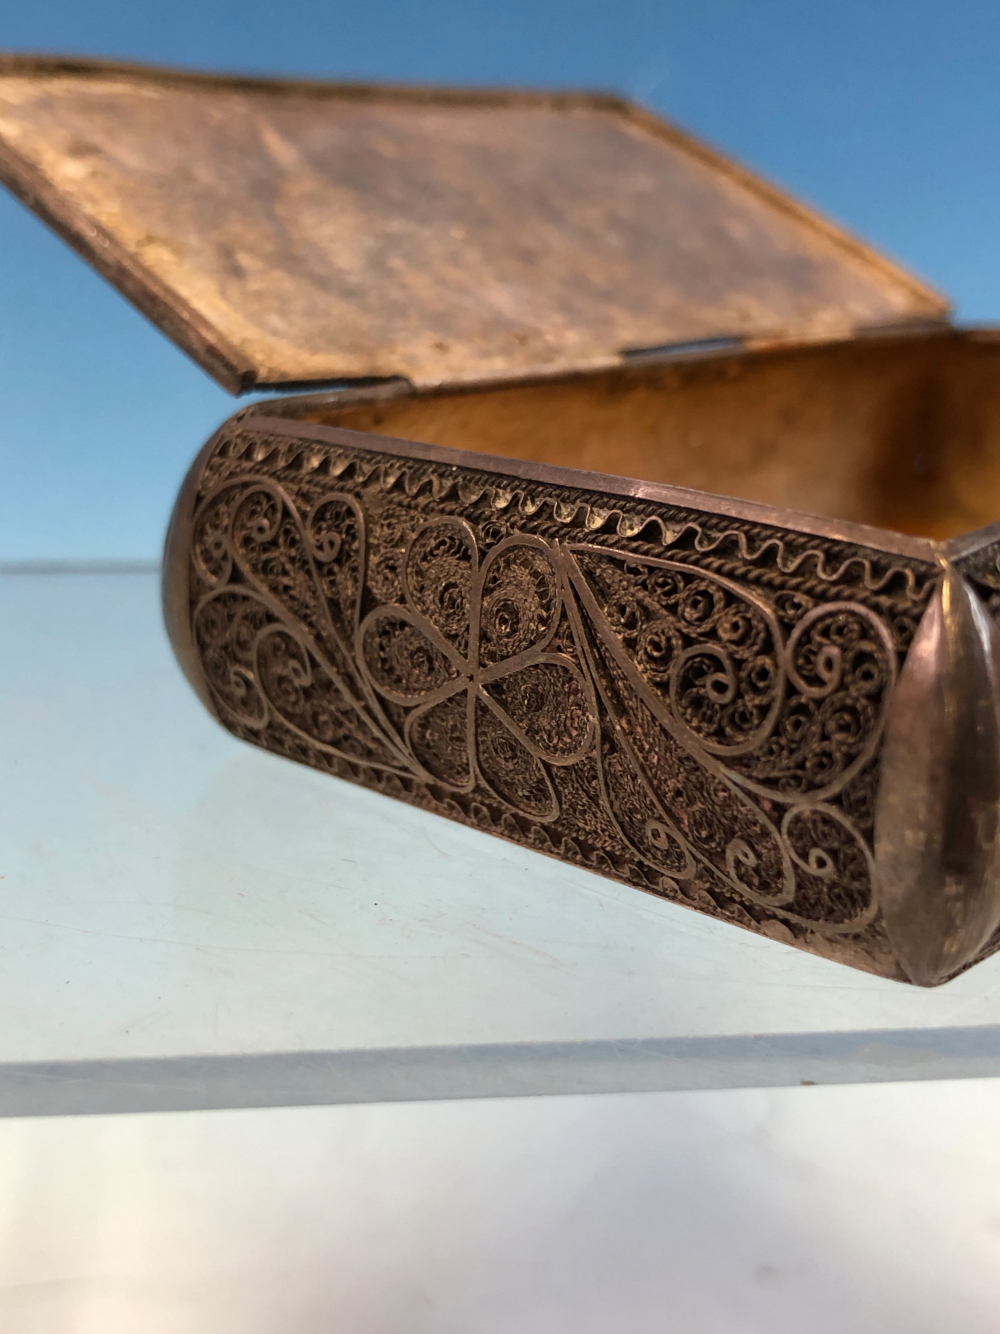 AN ANTIQUE EASTERN WHITE METAL LARGE SNUFF OR TOBACCO BOX WITH OVERLAID FILIGREE DECORATION. - Image 6 of 10